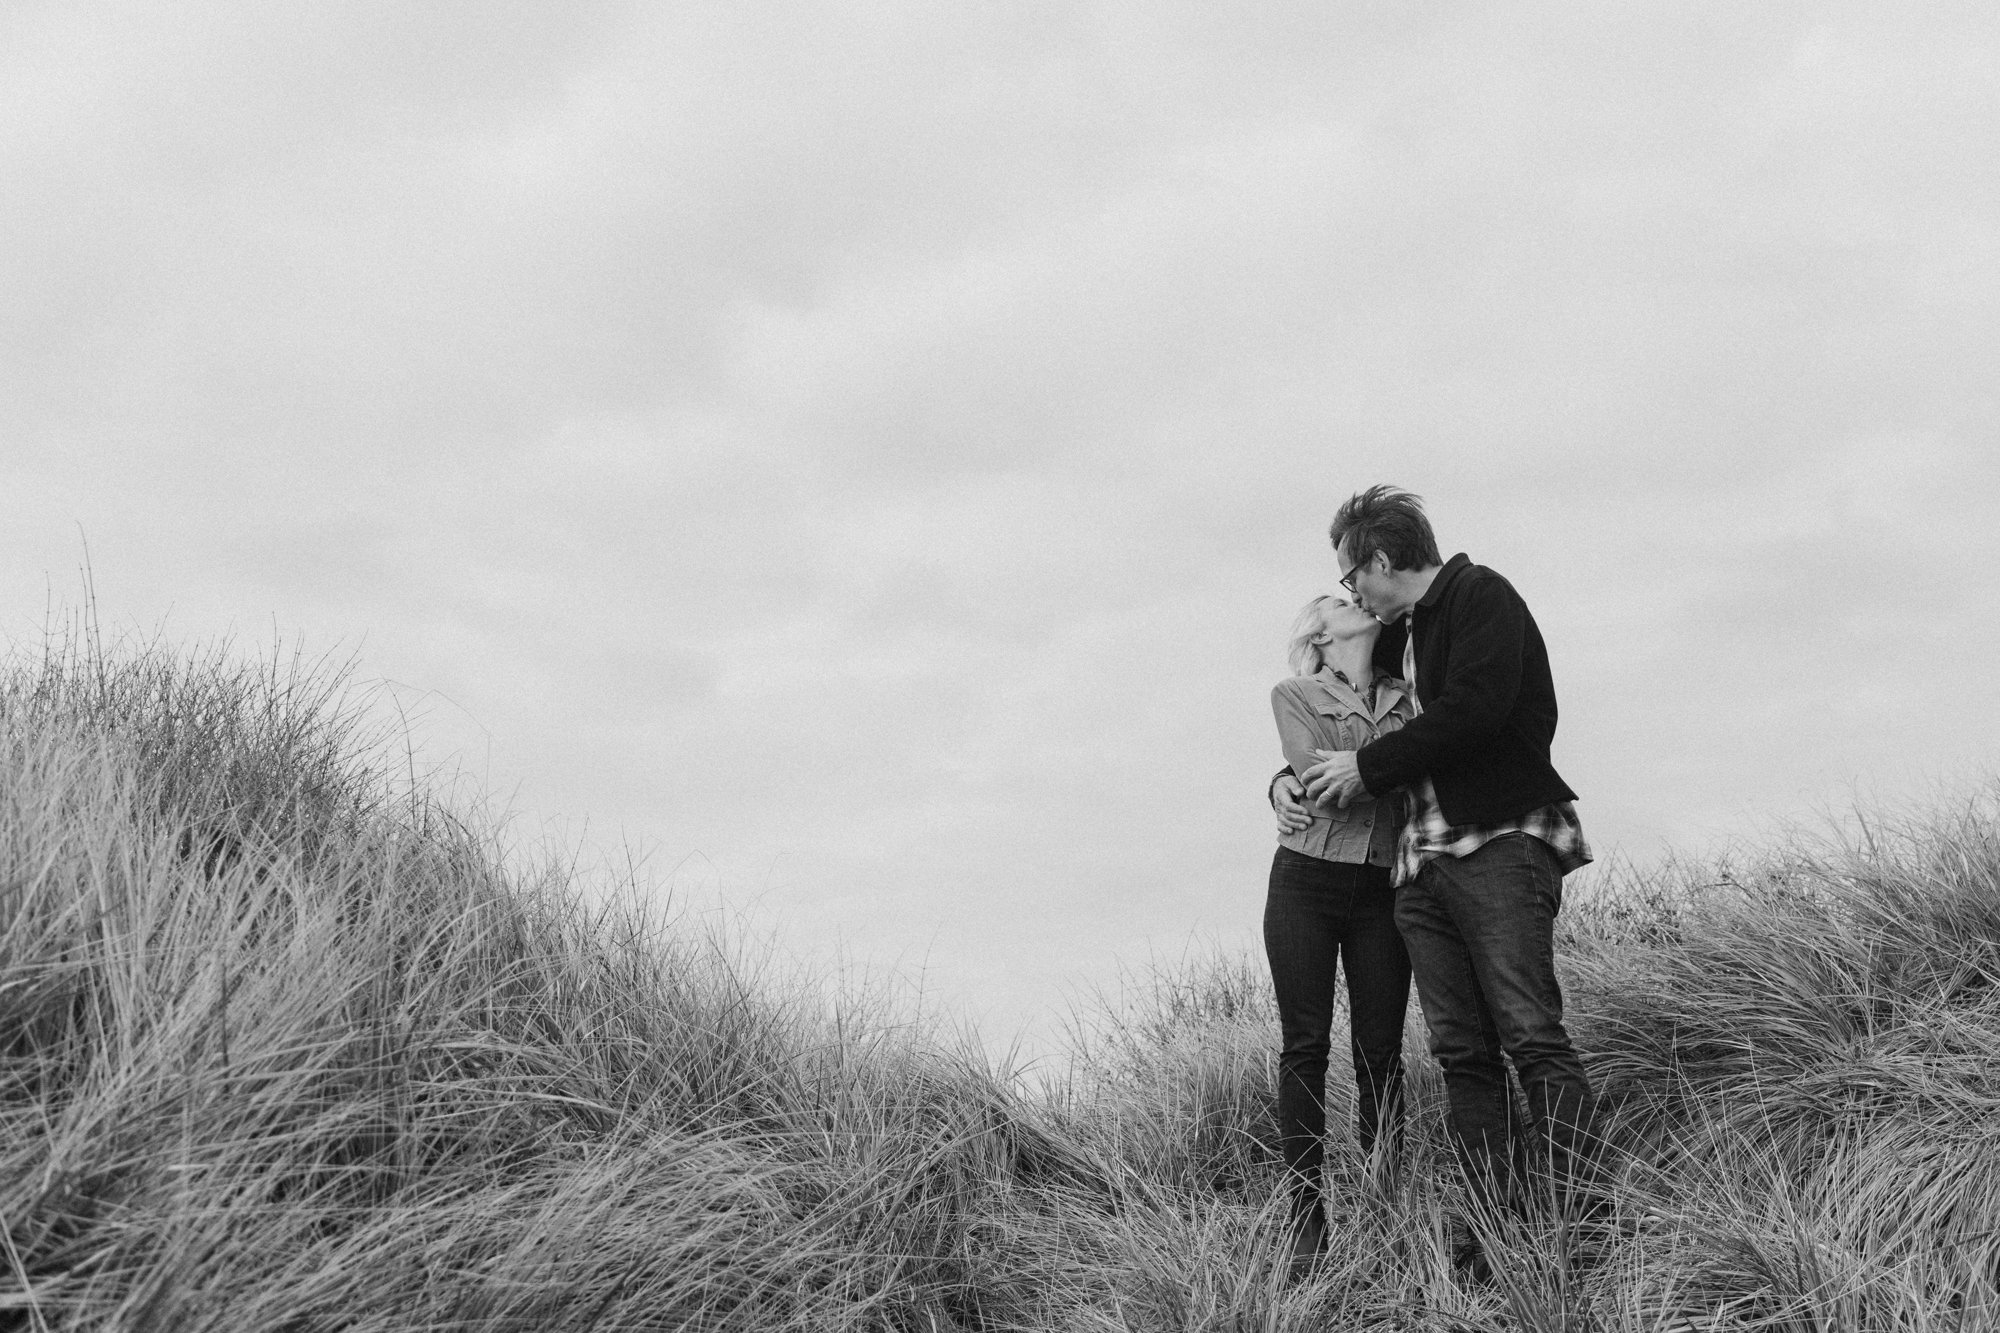 DSC_8427_Melissa Green & Tim Hall | December 10th 2021 | Elopement at the Lucy Vincent Beach in Chilmark-2_Low_Res_Melissa_Tim_Elopement_Lucy_Vincent_Beach_December_10th_2021_50.jpg